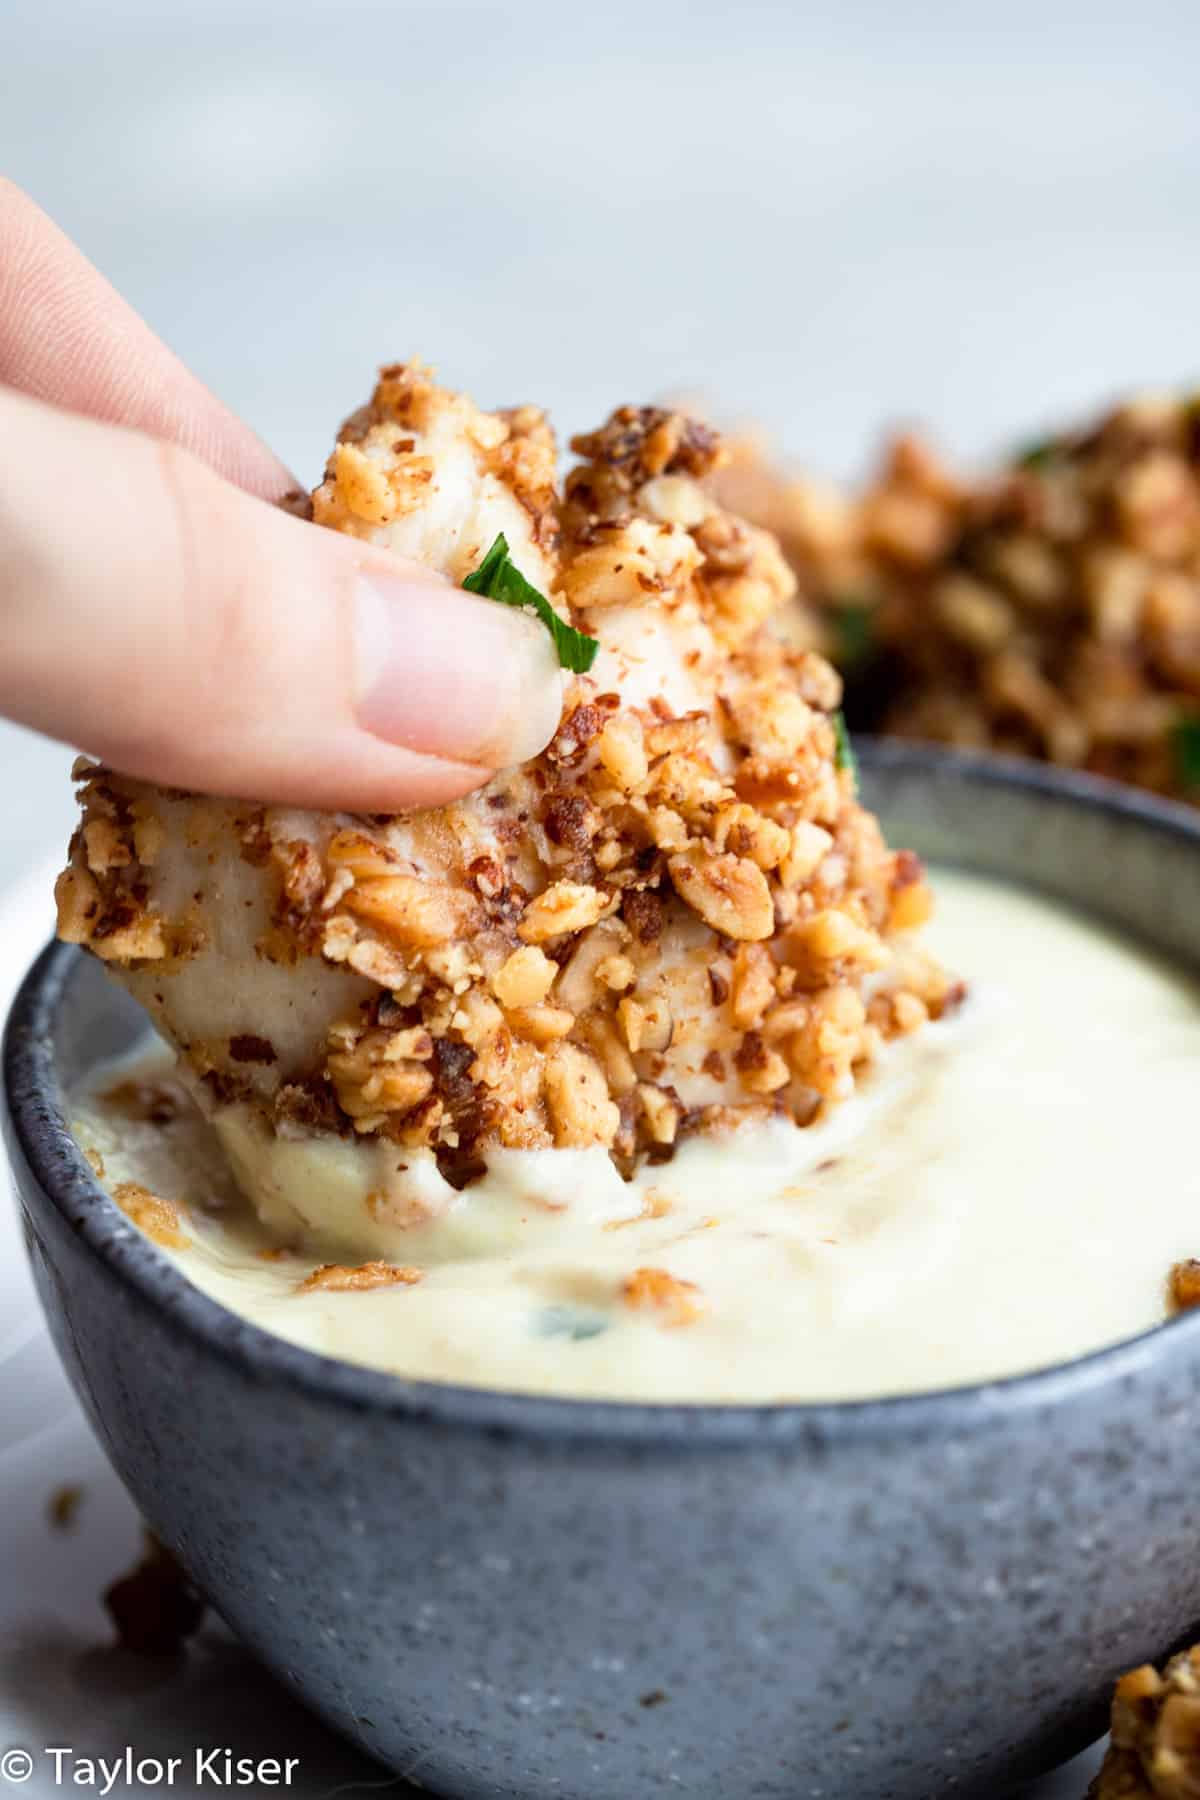 baked almond crusted chicken bites dipping in a sauce